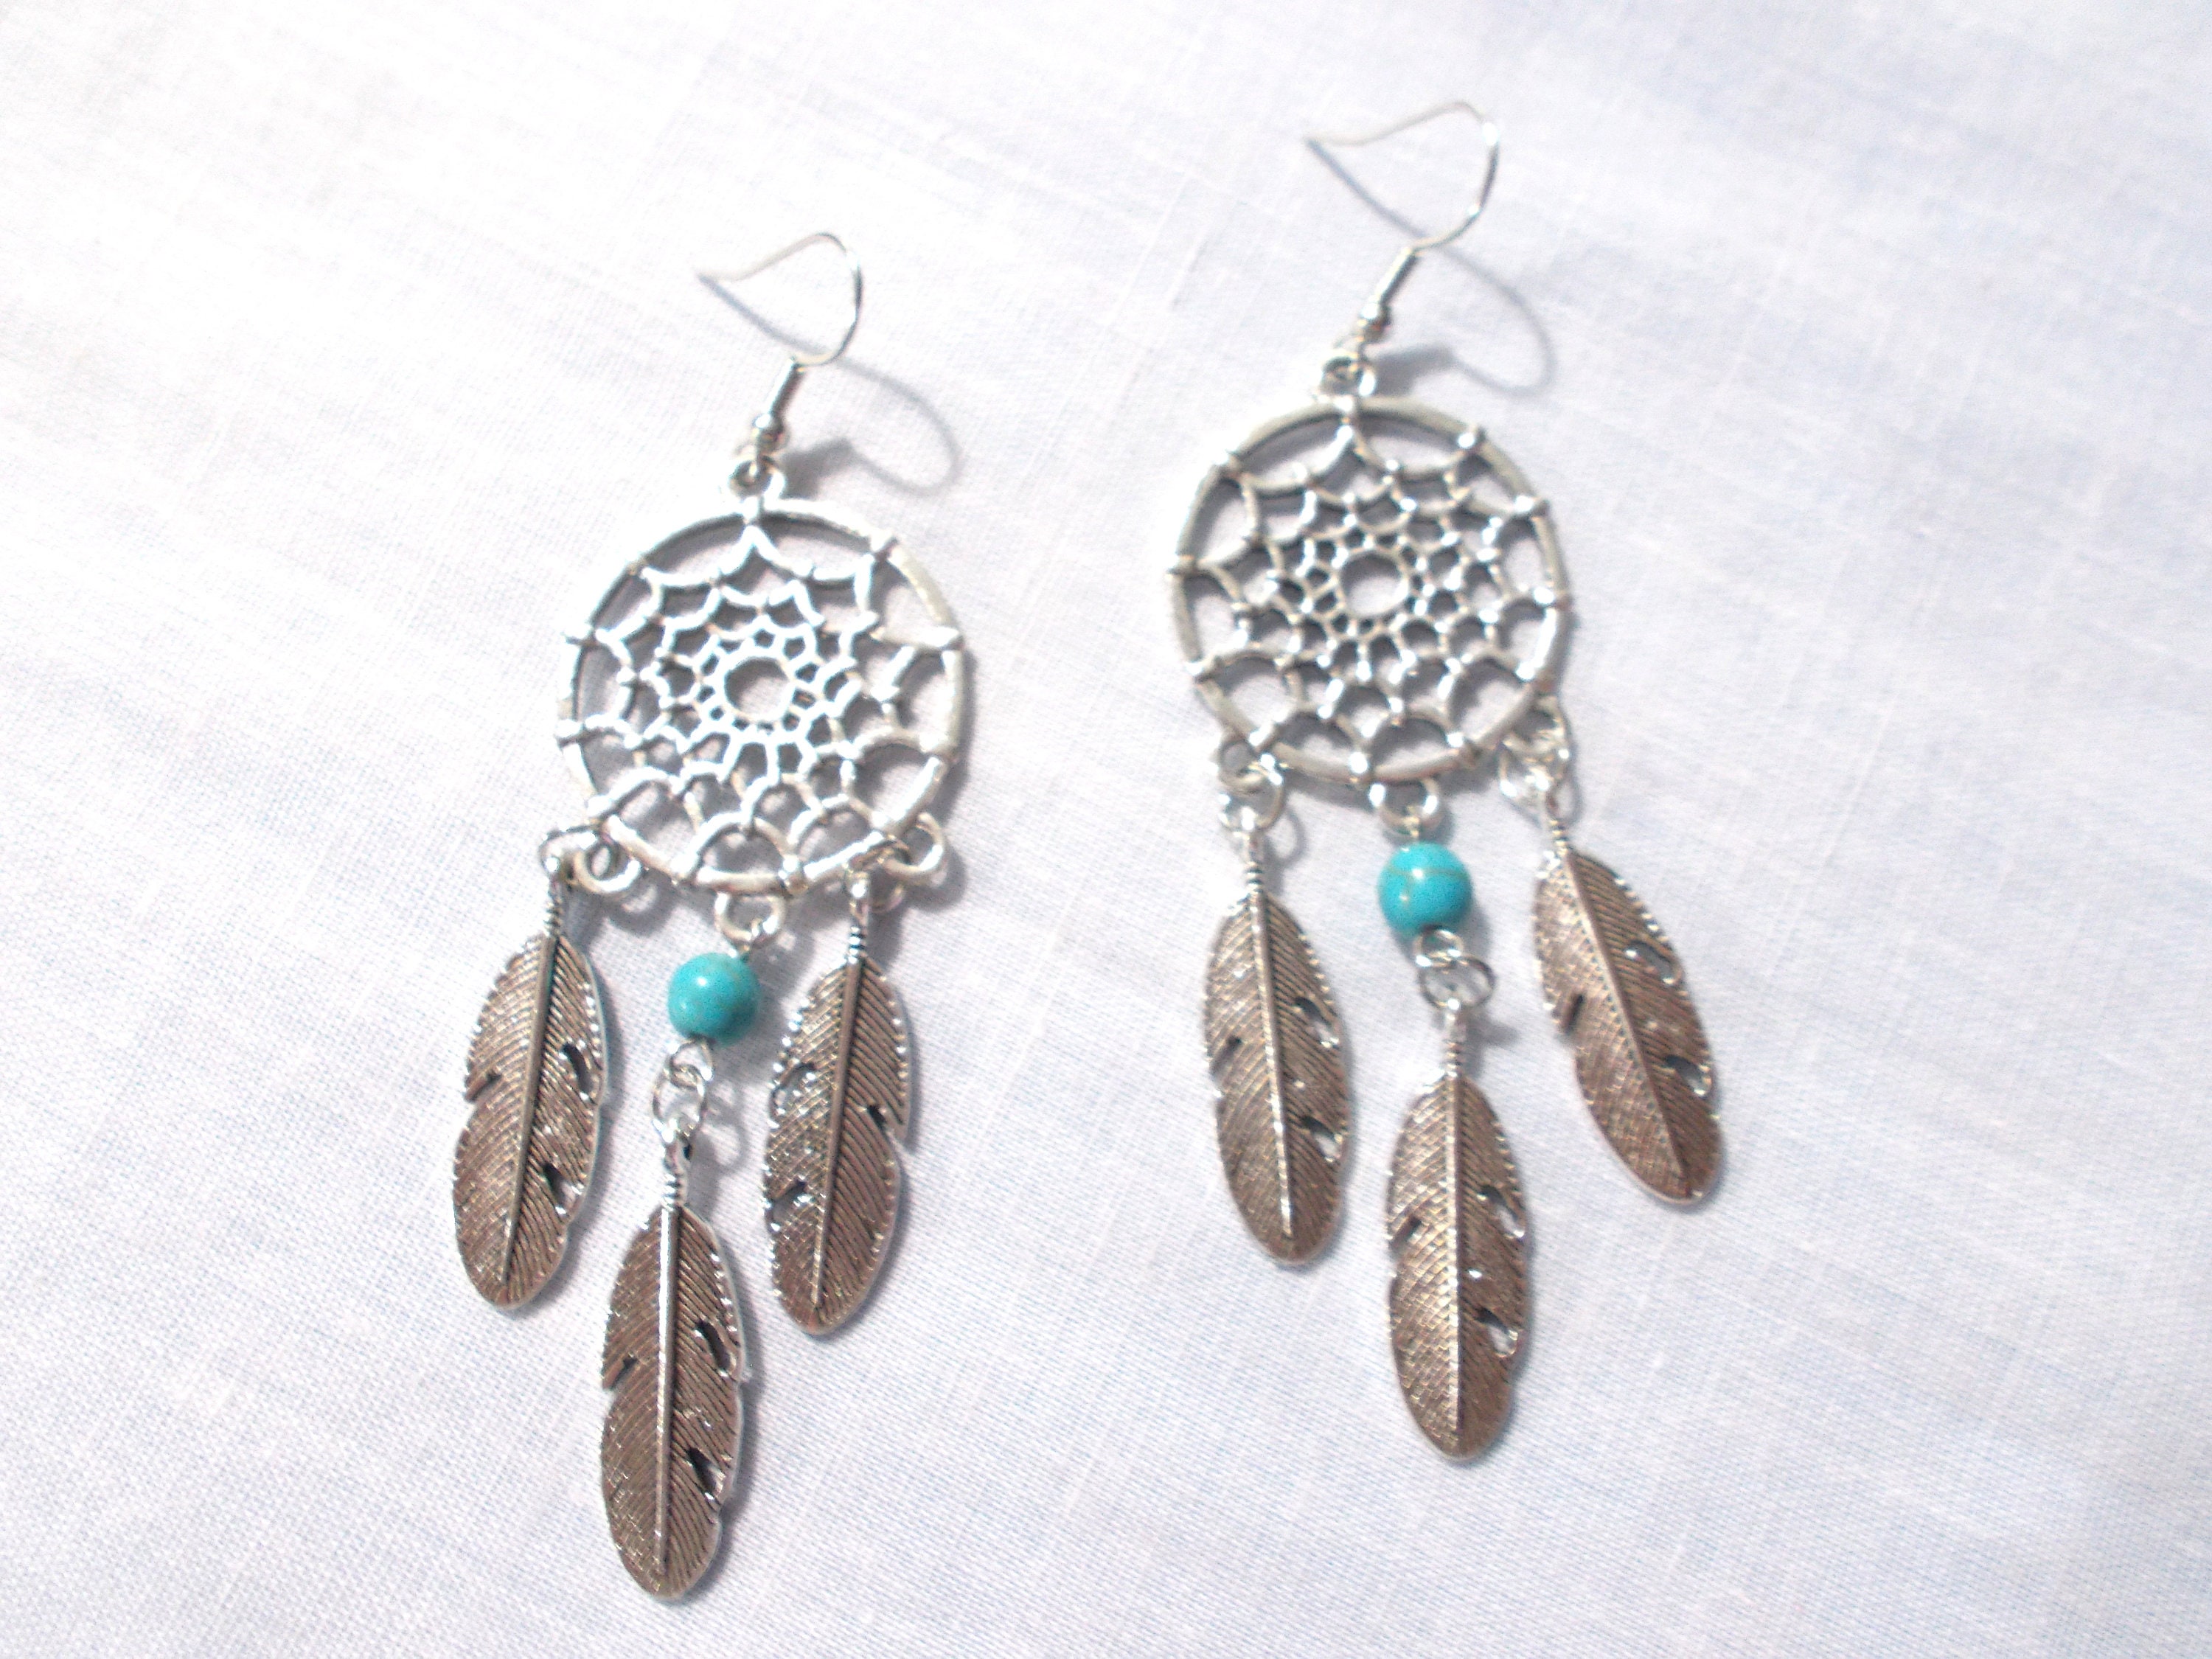 Silver Earrings Small Light Blue Turquoise Bead Dream-catcher Navajo Jewelry St 